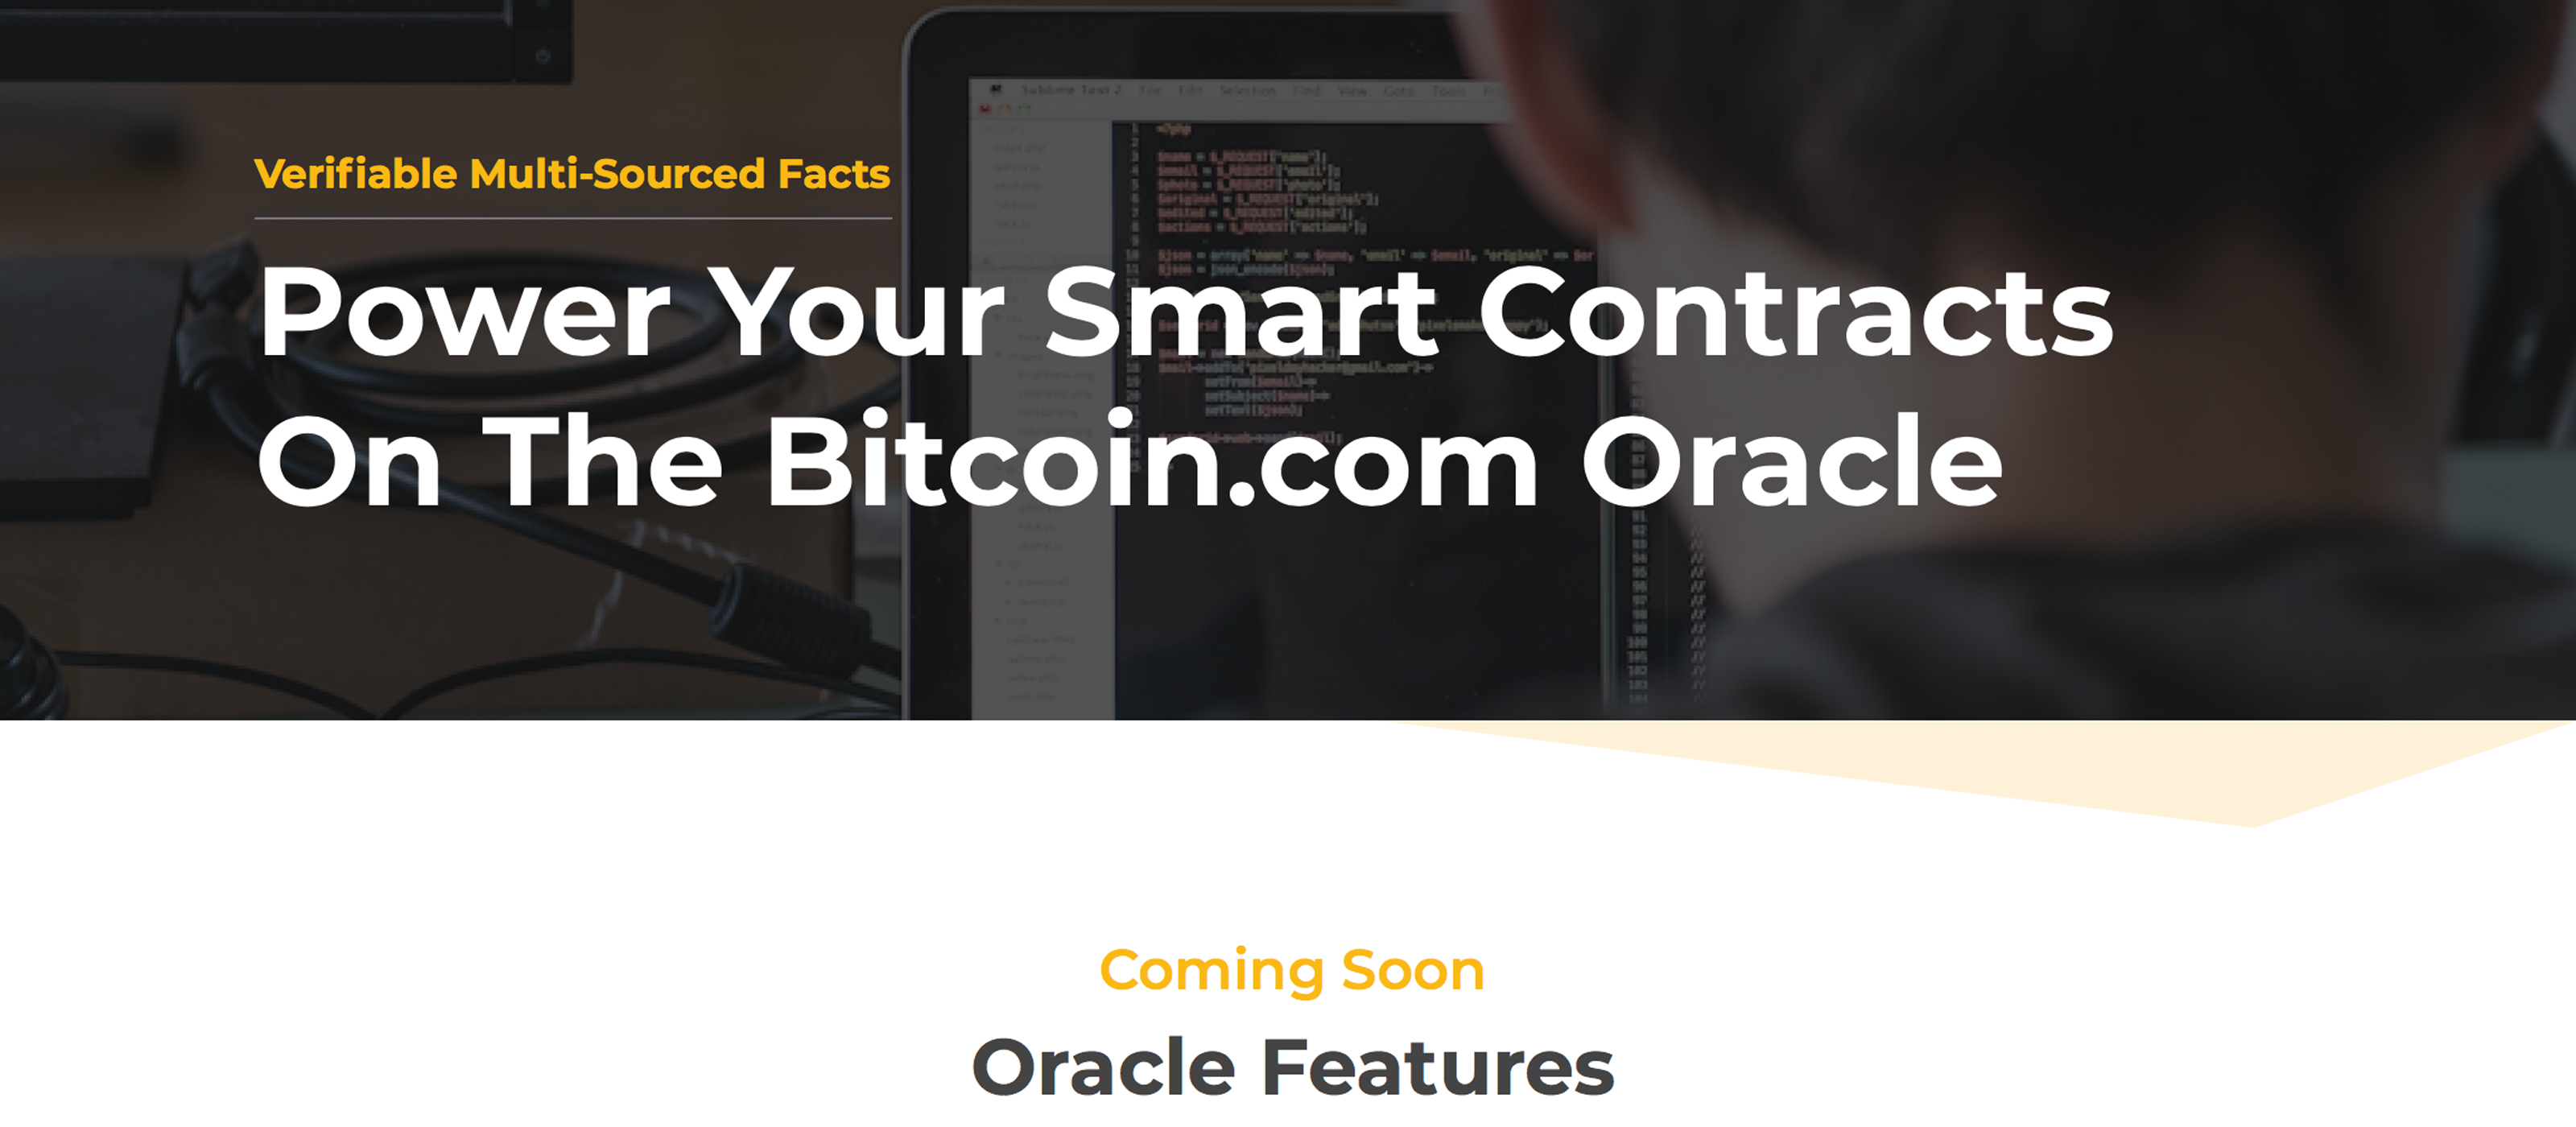 Bitcoin.com’s Oracle Aims to Bolster BCH-Powered Smart Contracts